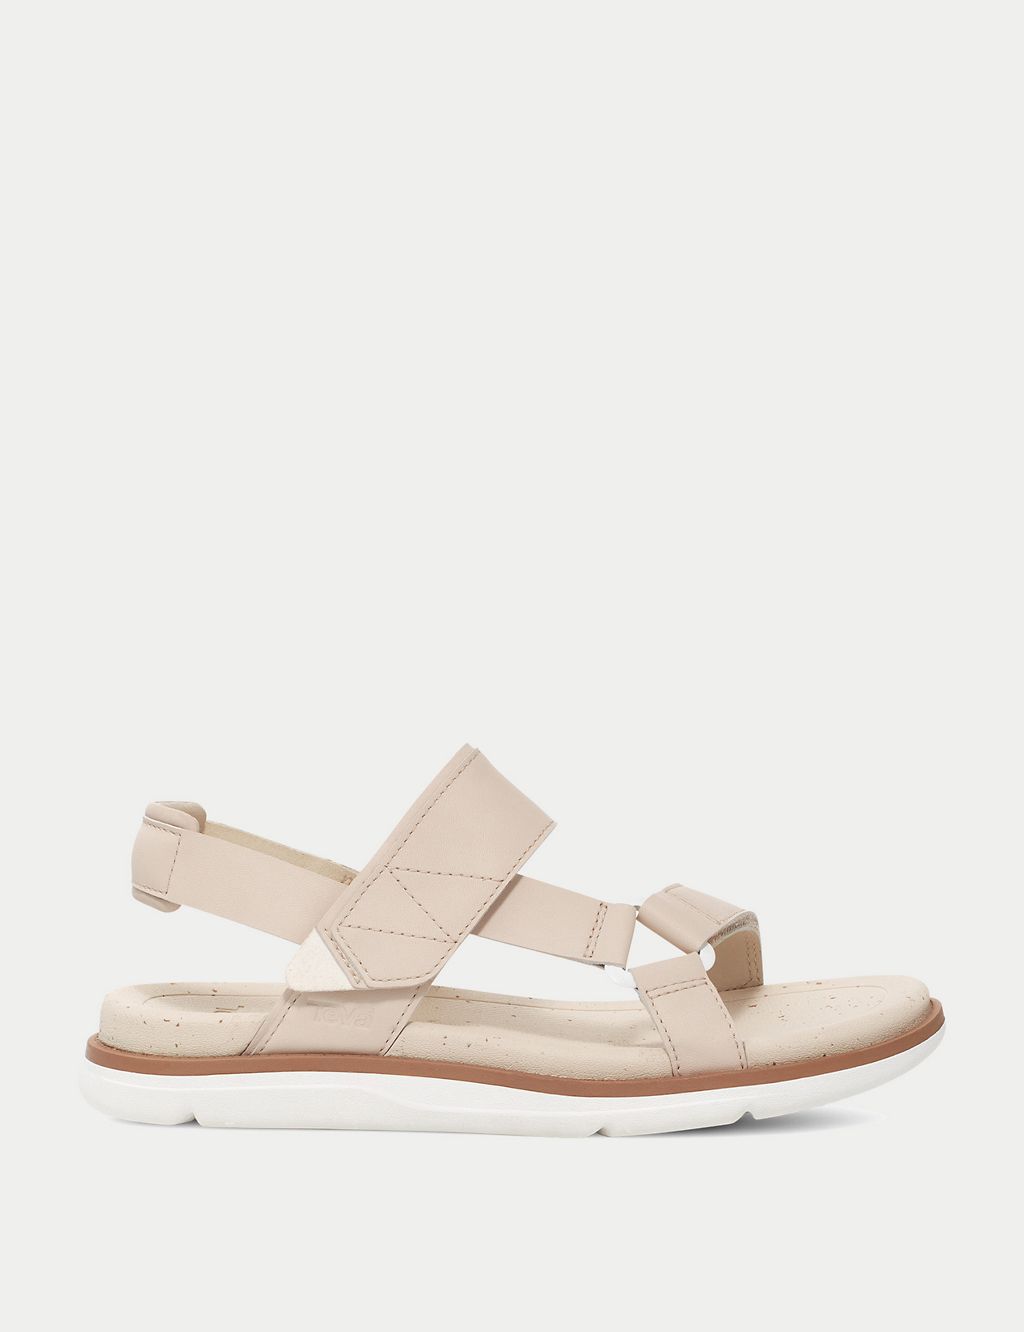 Madera Leather Flat Slingback Sandals 3 of 6